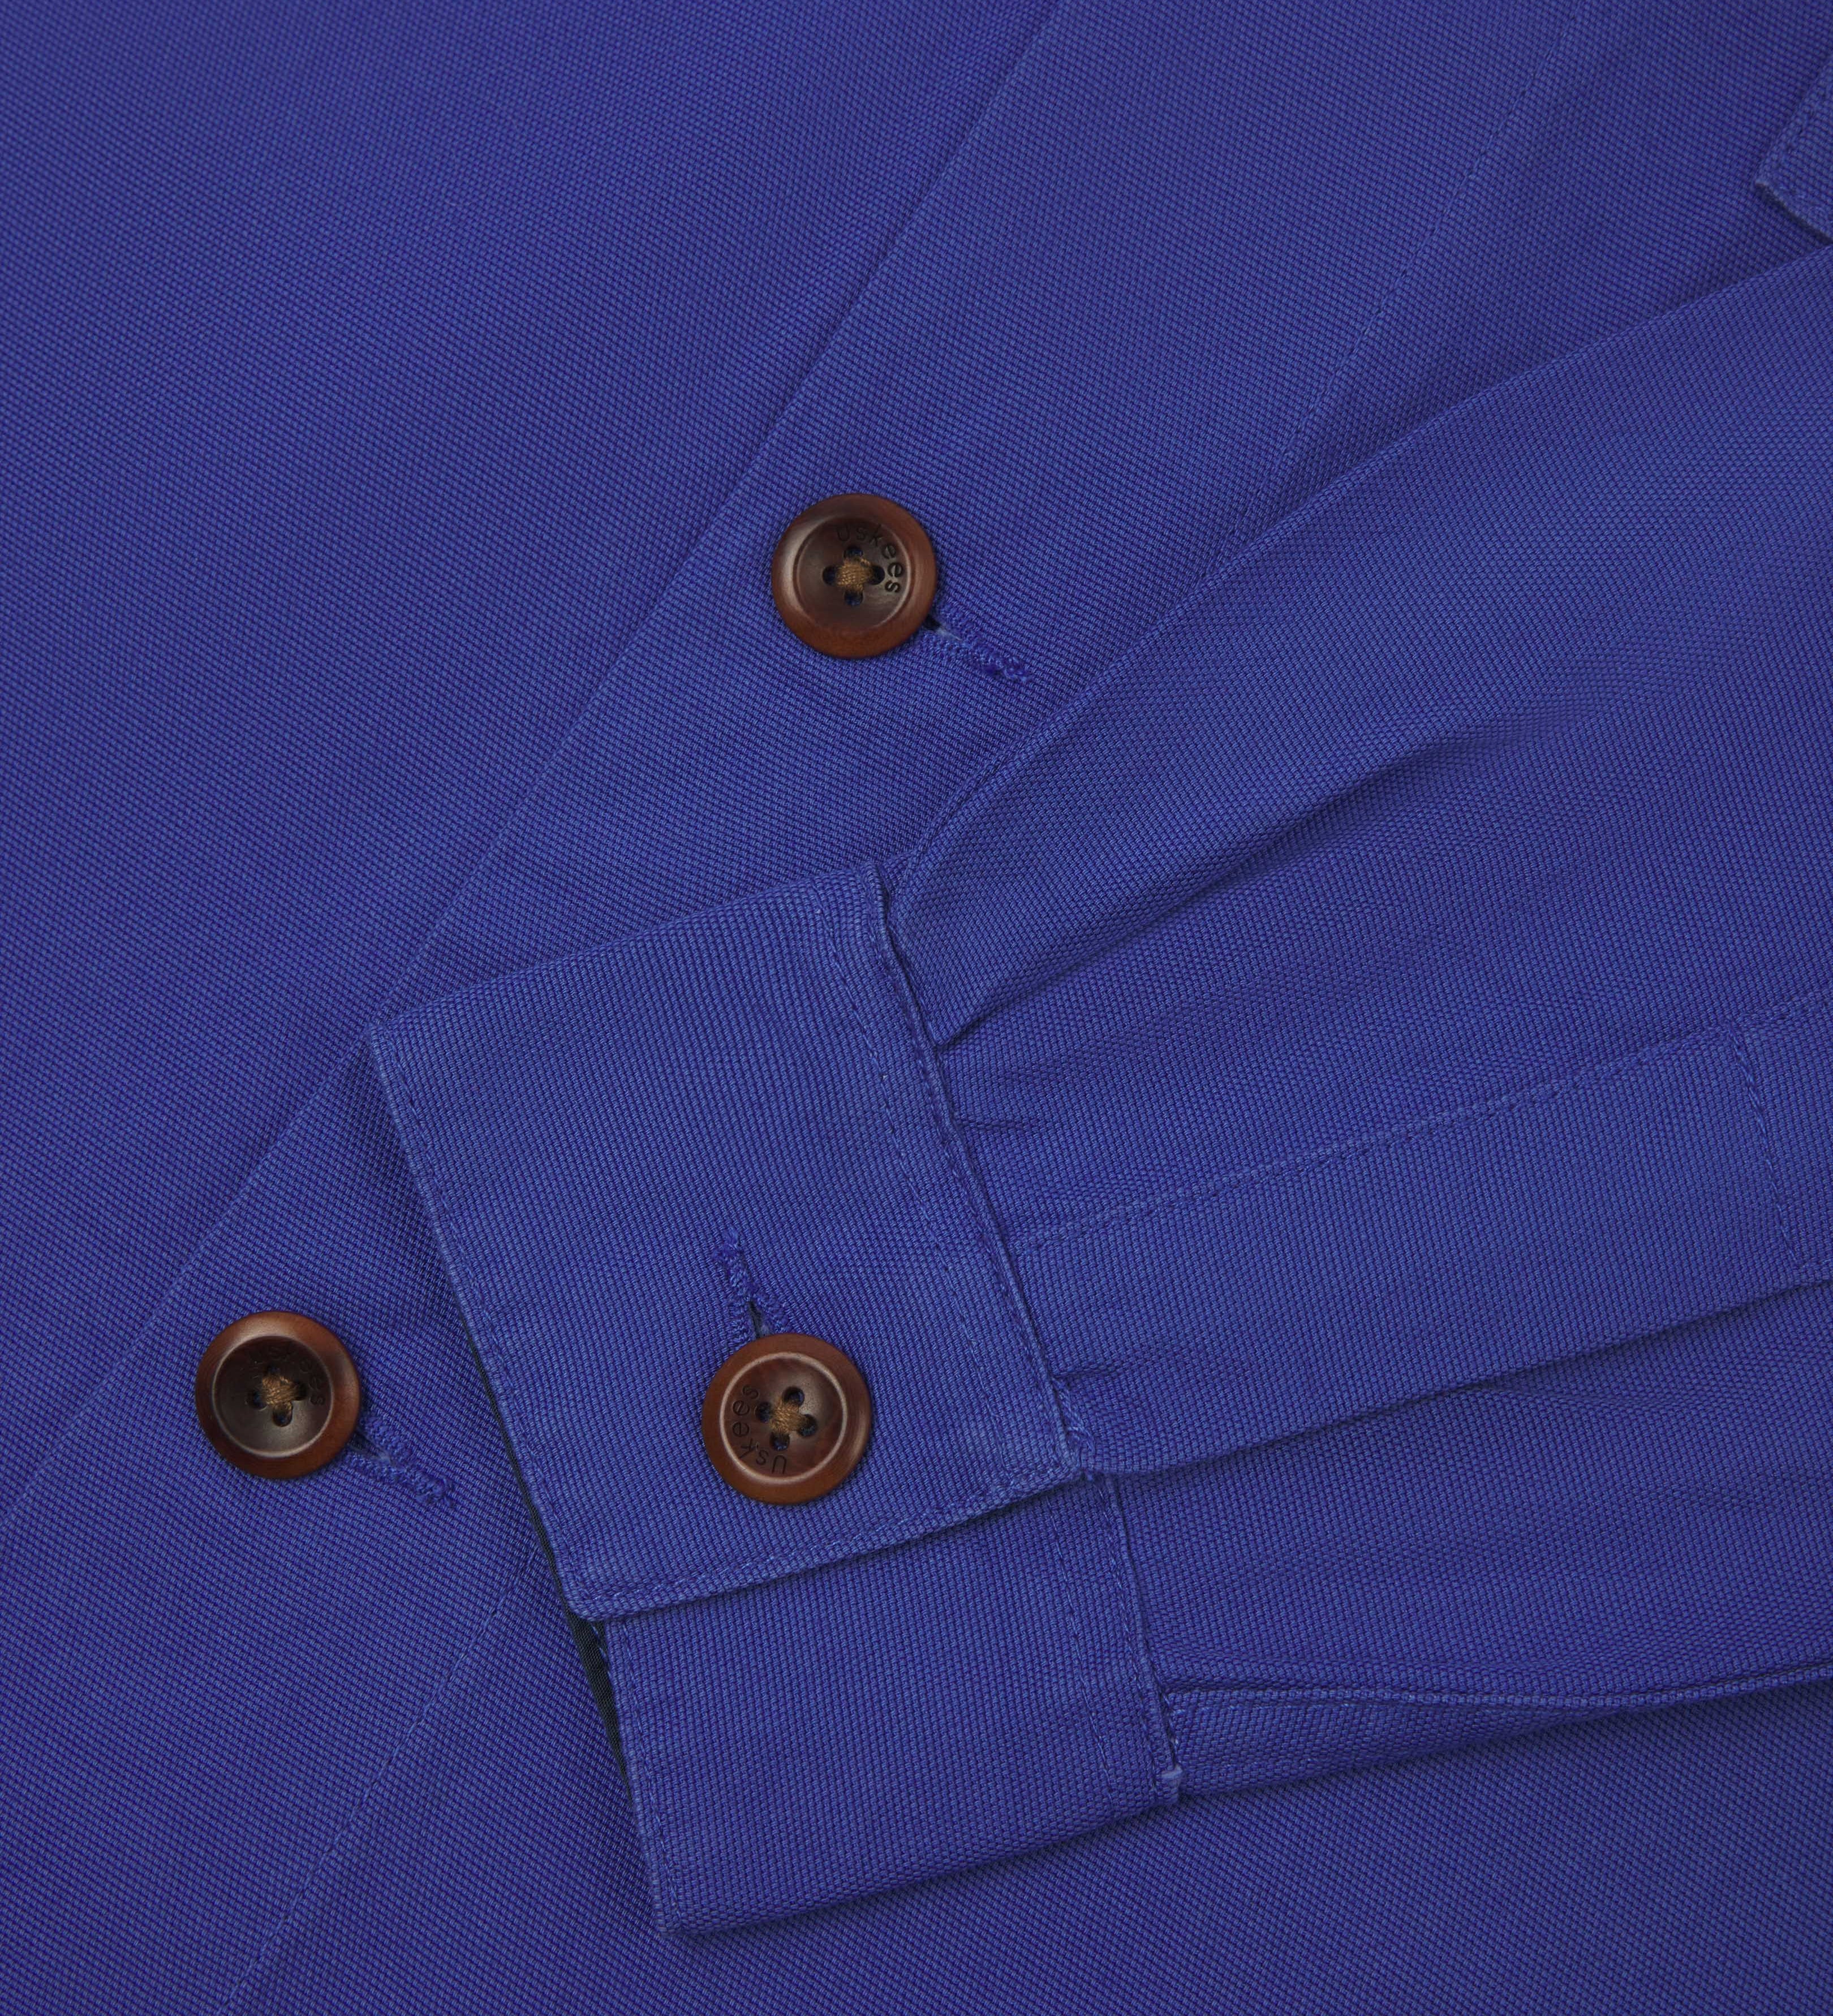 Close-up view showing sleeve and corozo buttons of ultra blue buttoned 3003 workshirt for men from Uskees.